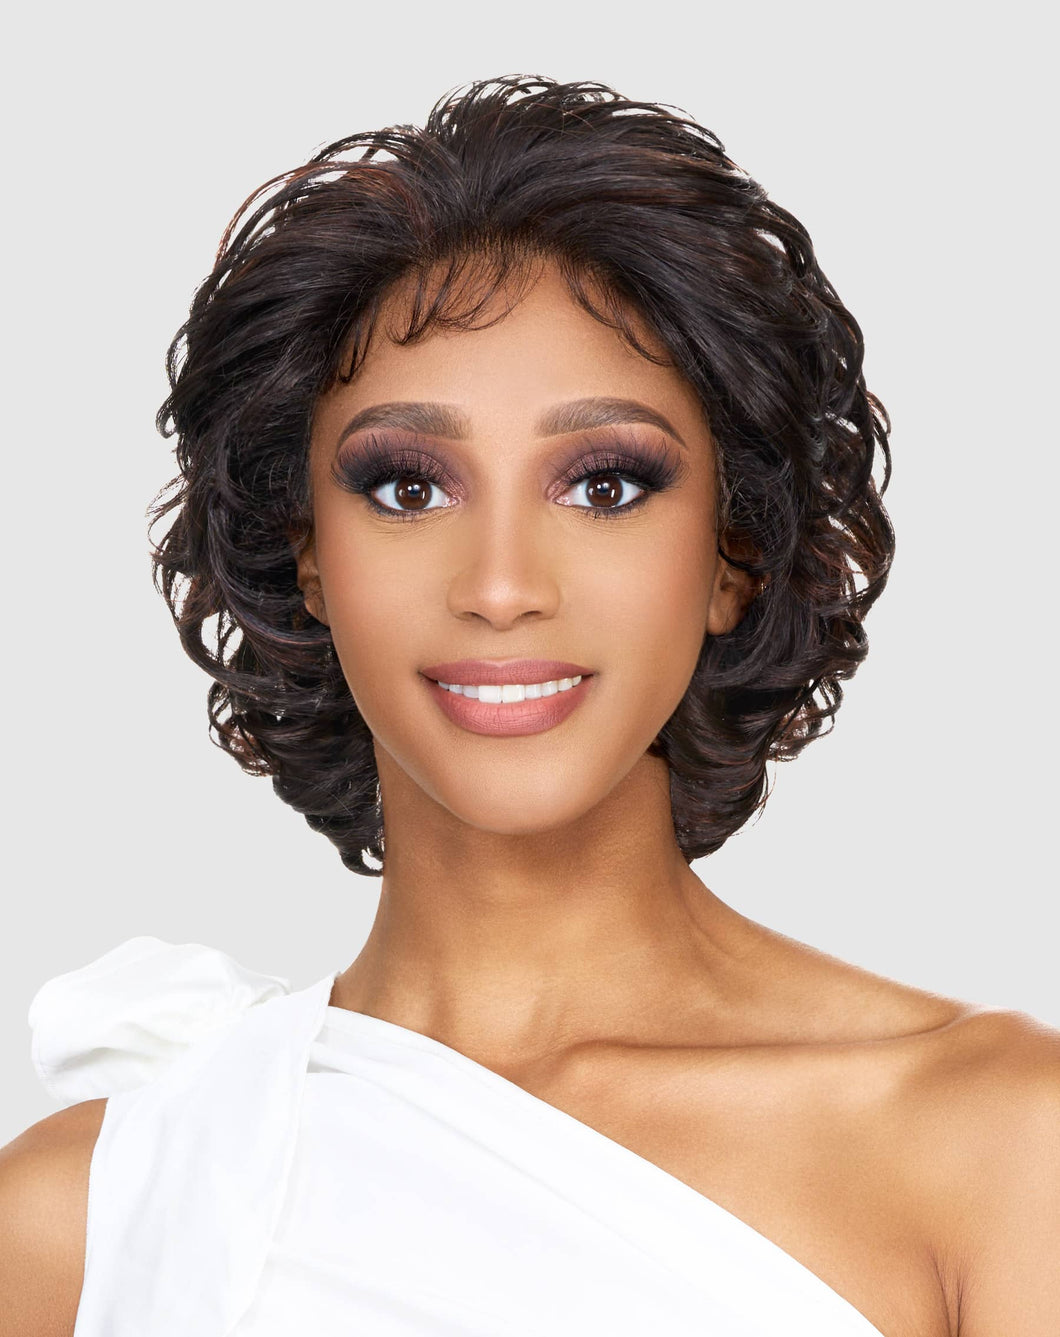 Vanessa synthetic lace front wig - ARTISA COLLECTION 134 DAYLILY